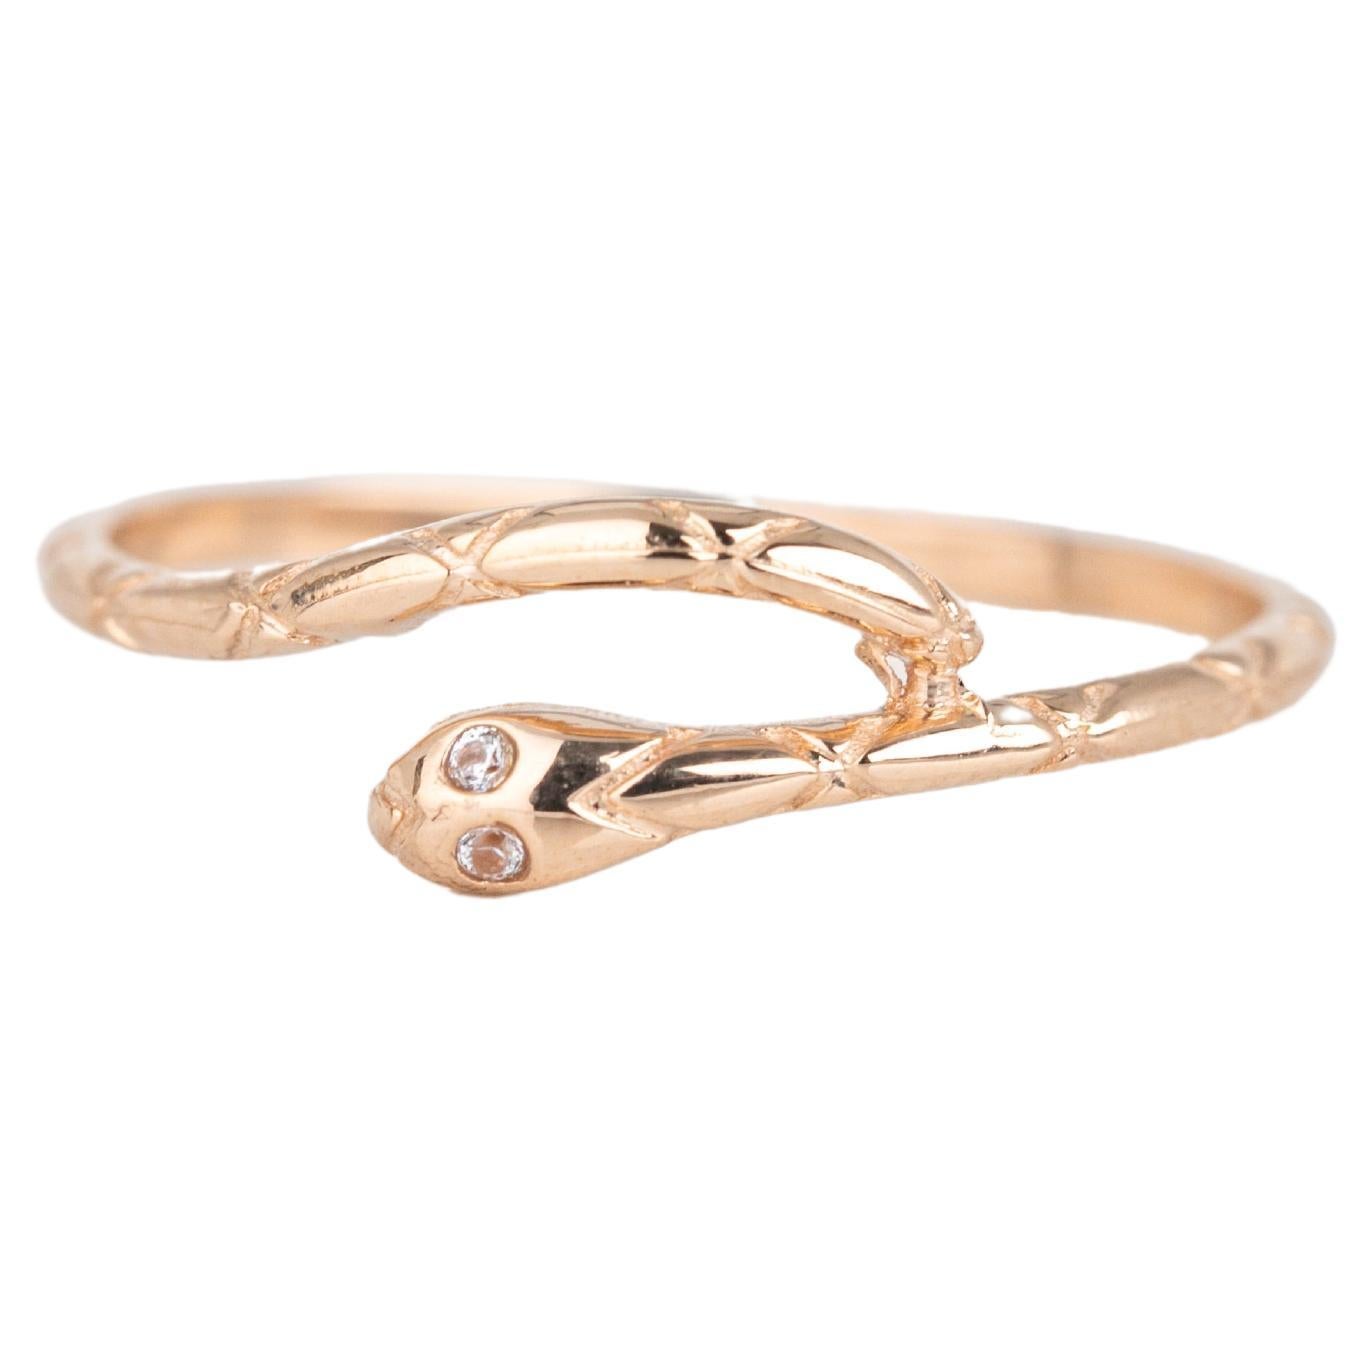 For Sale:  14k Gold Snake Ring, Serpent Shape Pinky, Stackable Ring with Moissanite